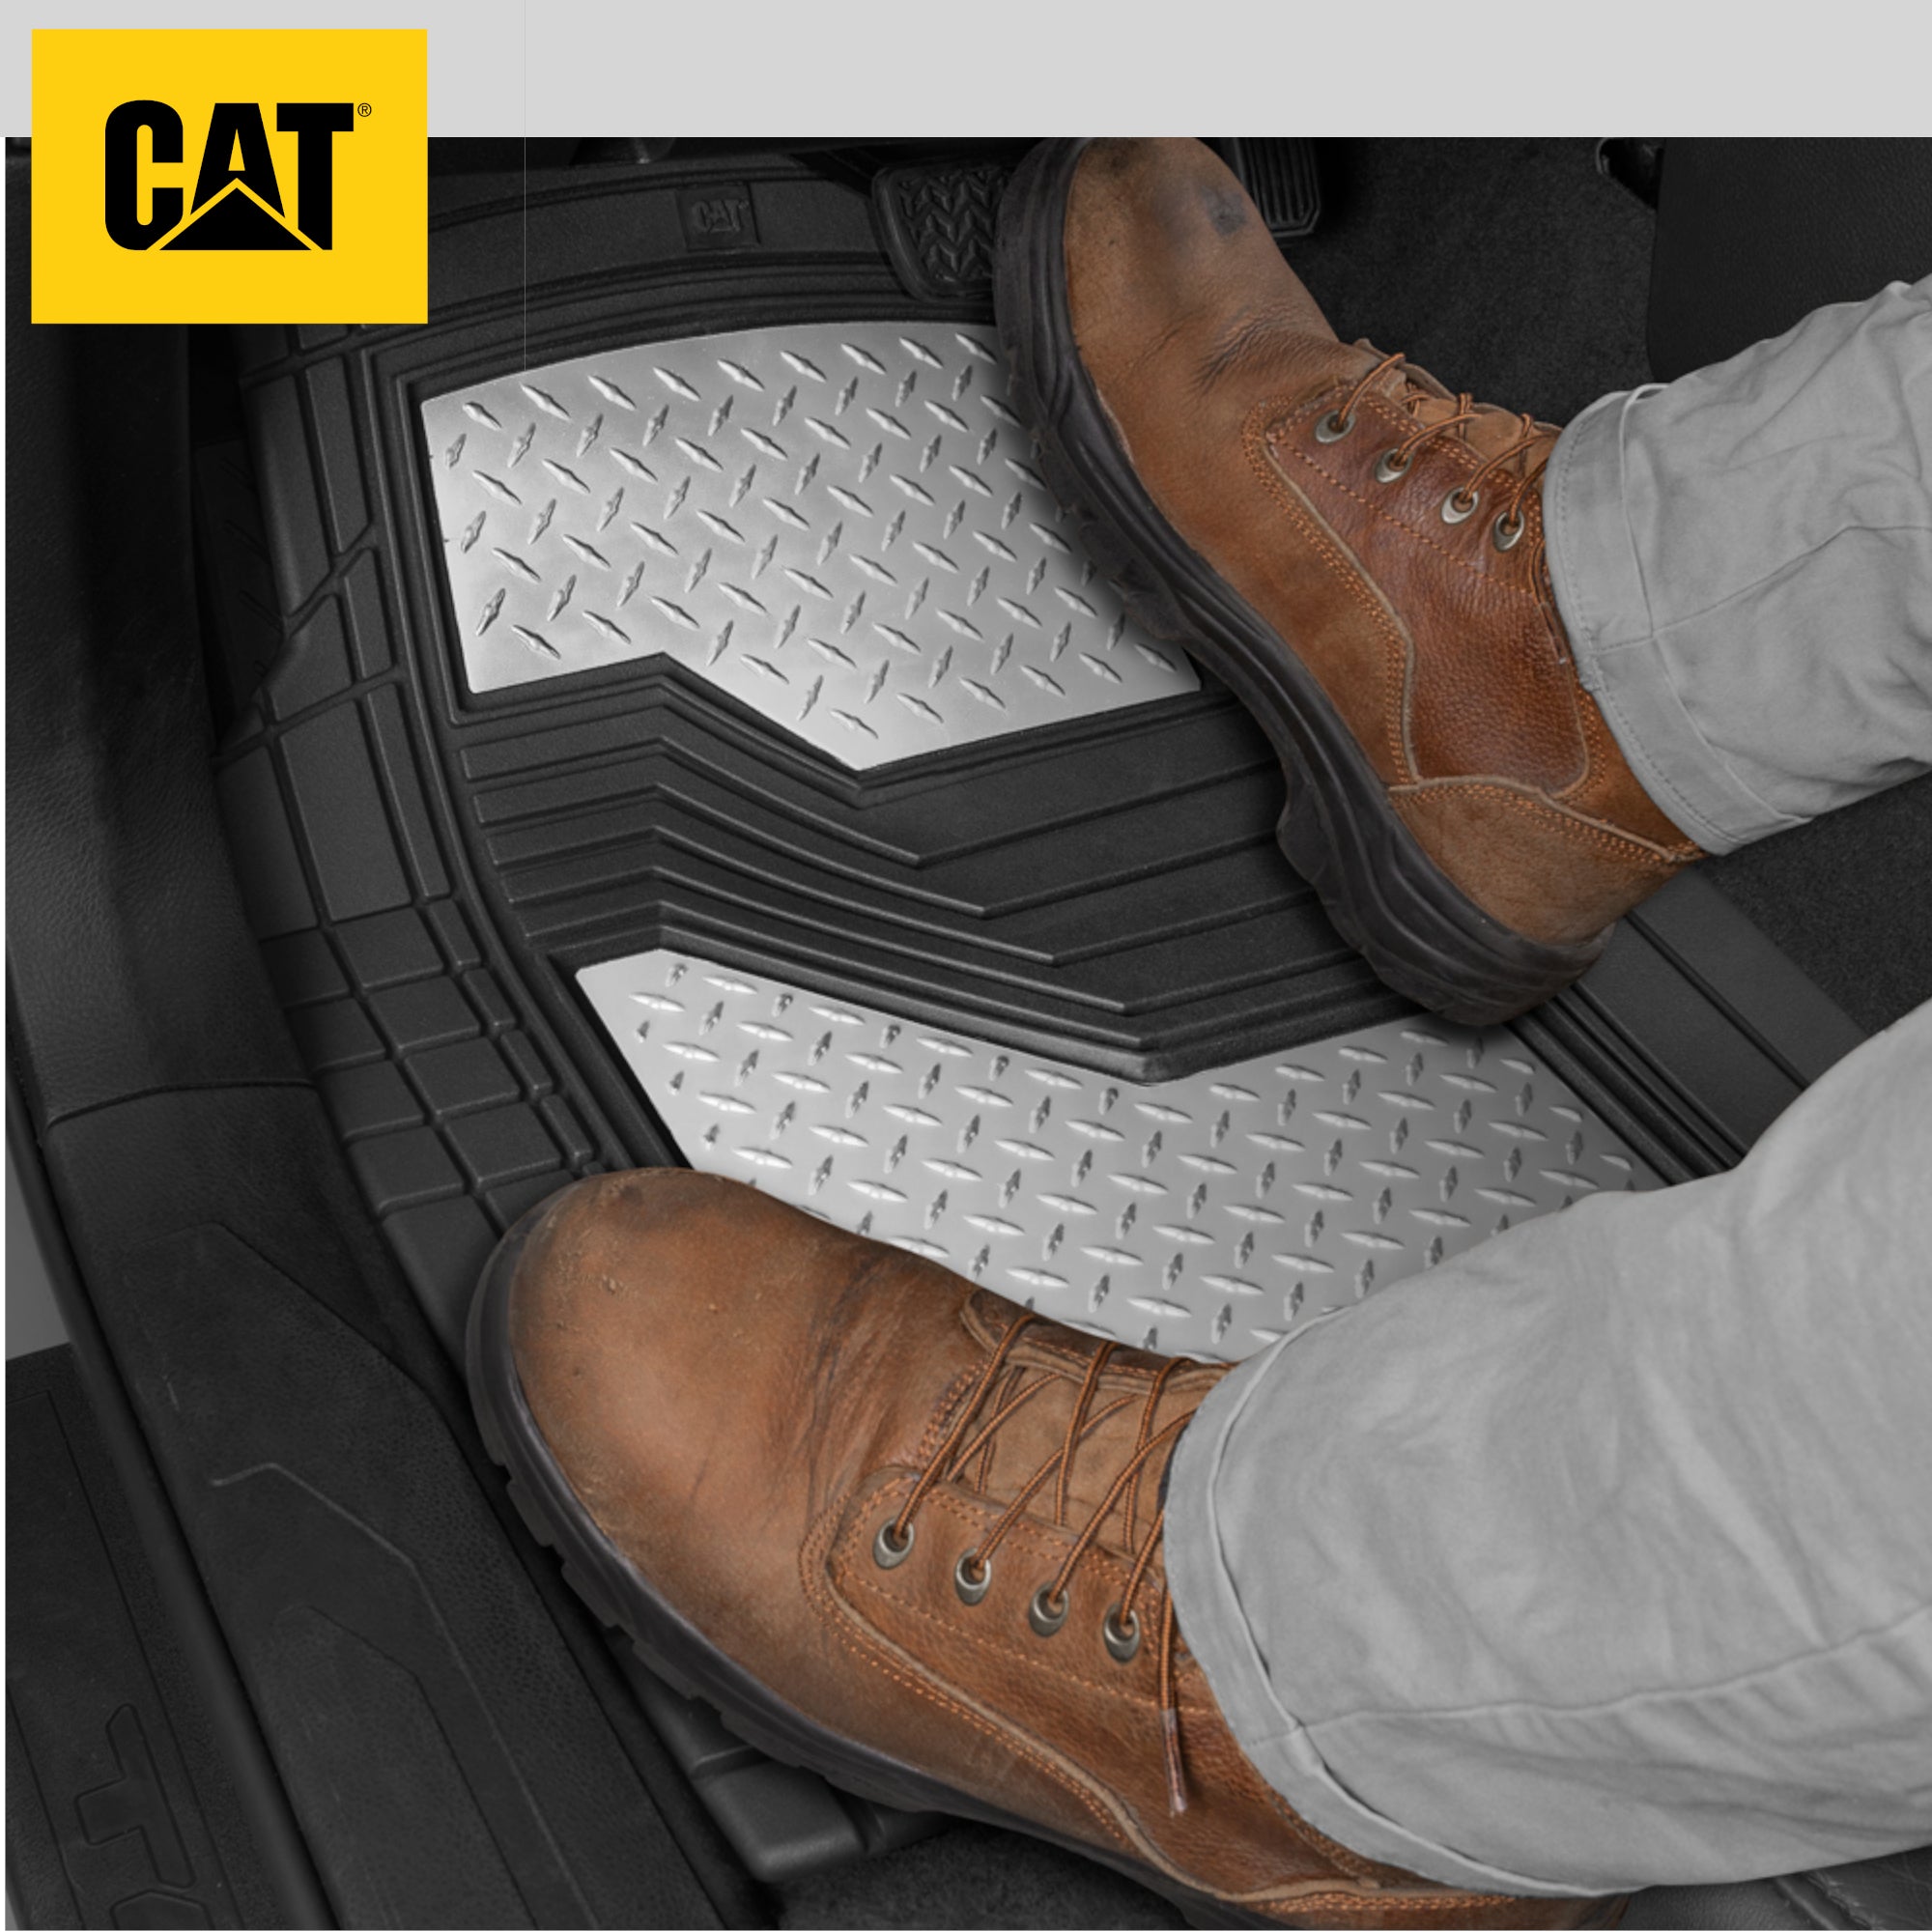 Cat® Heavy Duty Black & Silver Rubber Floor Mats All Weather for Car Truck SUV & Van Total Protection Durable Trim to Fit Liners - Black/Silver:#E3E3E3